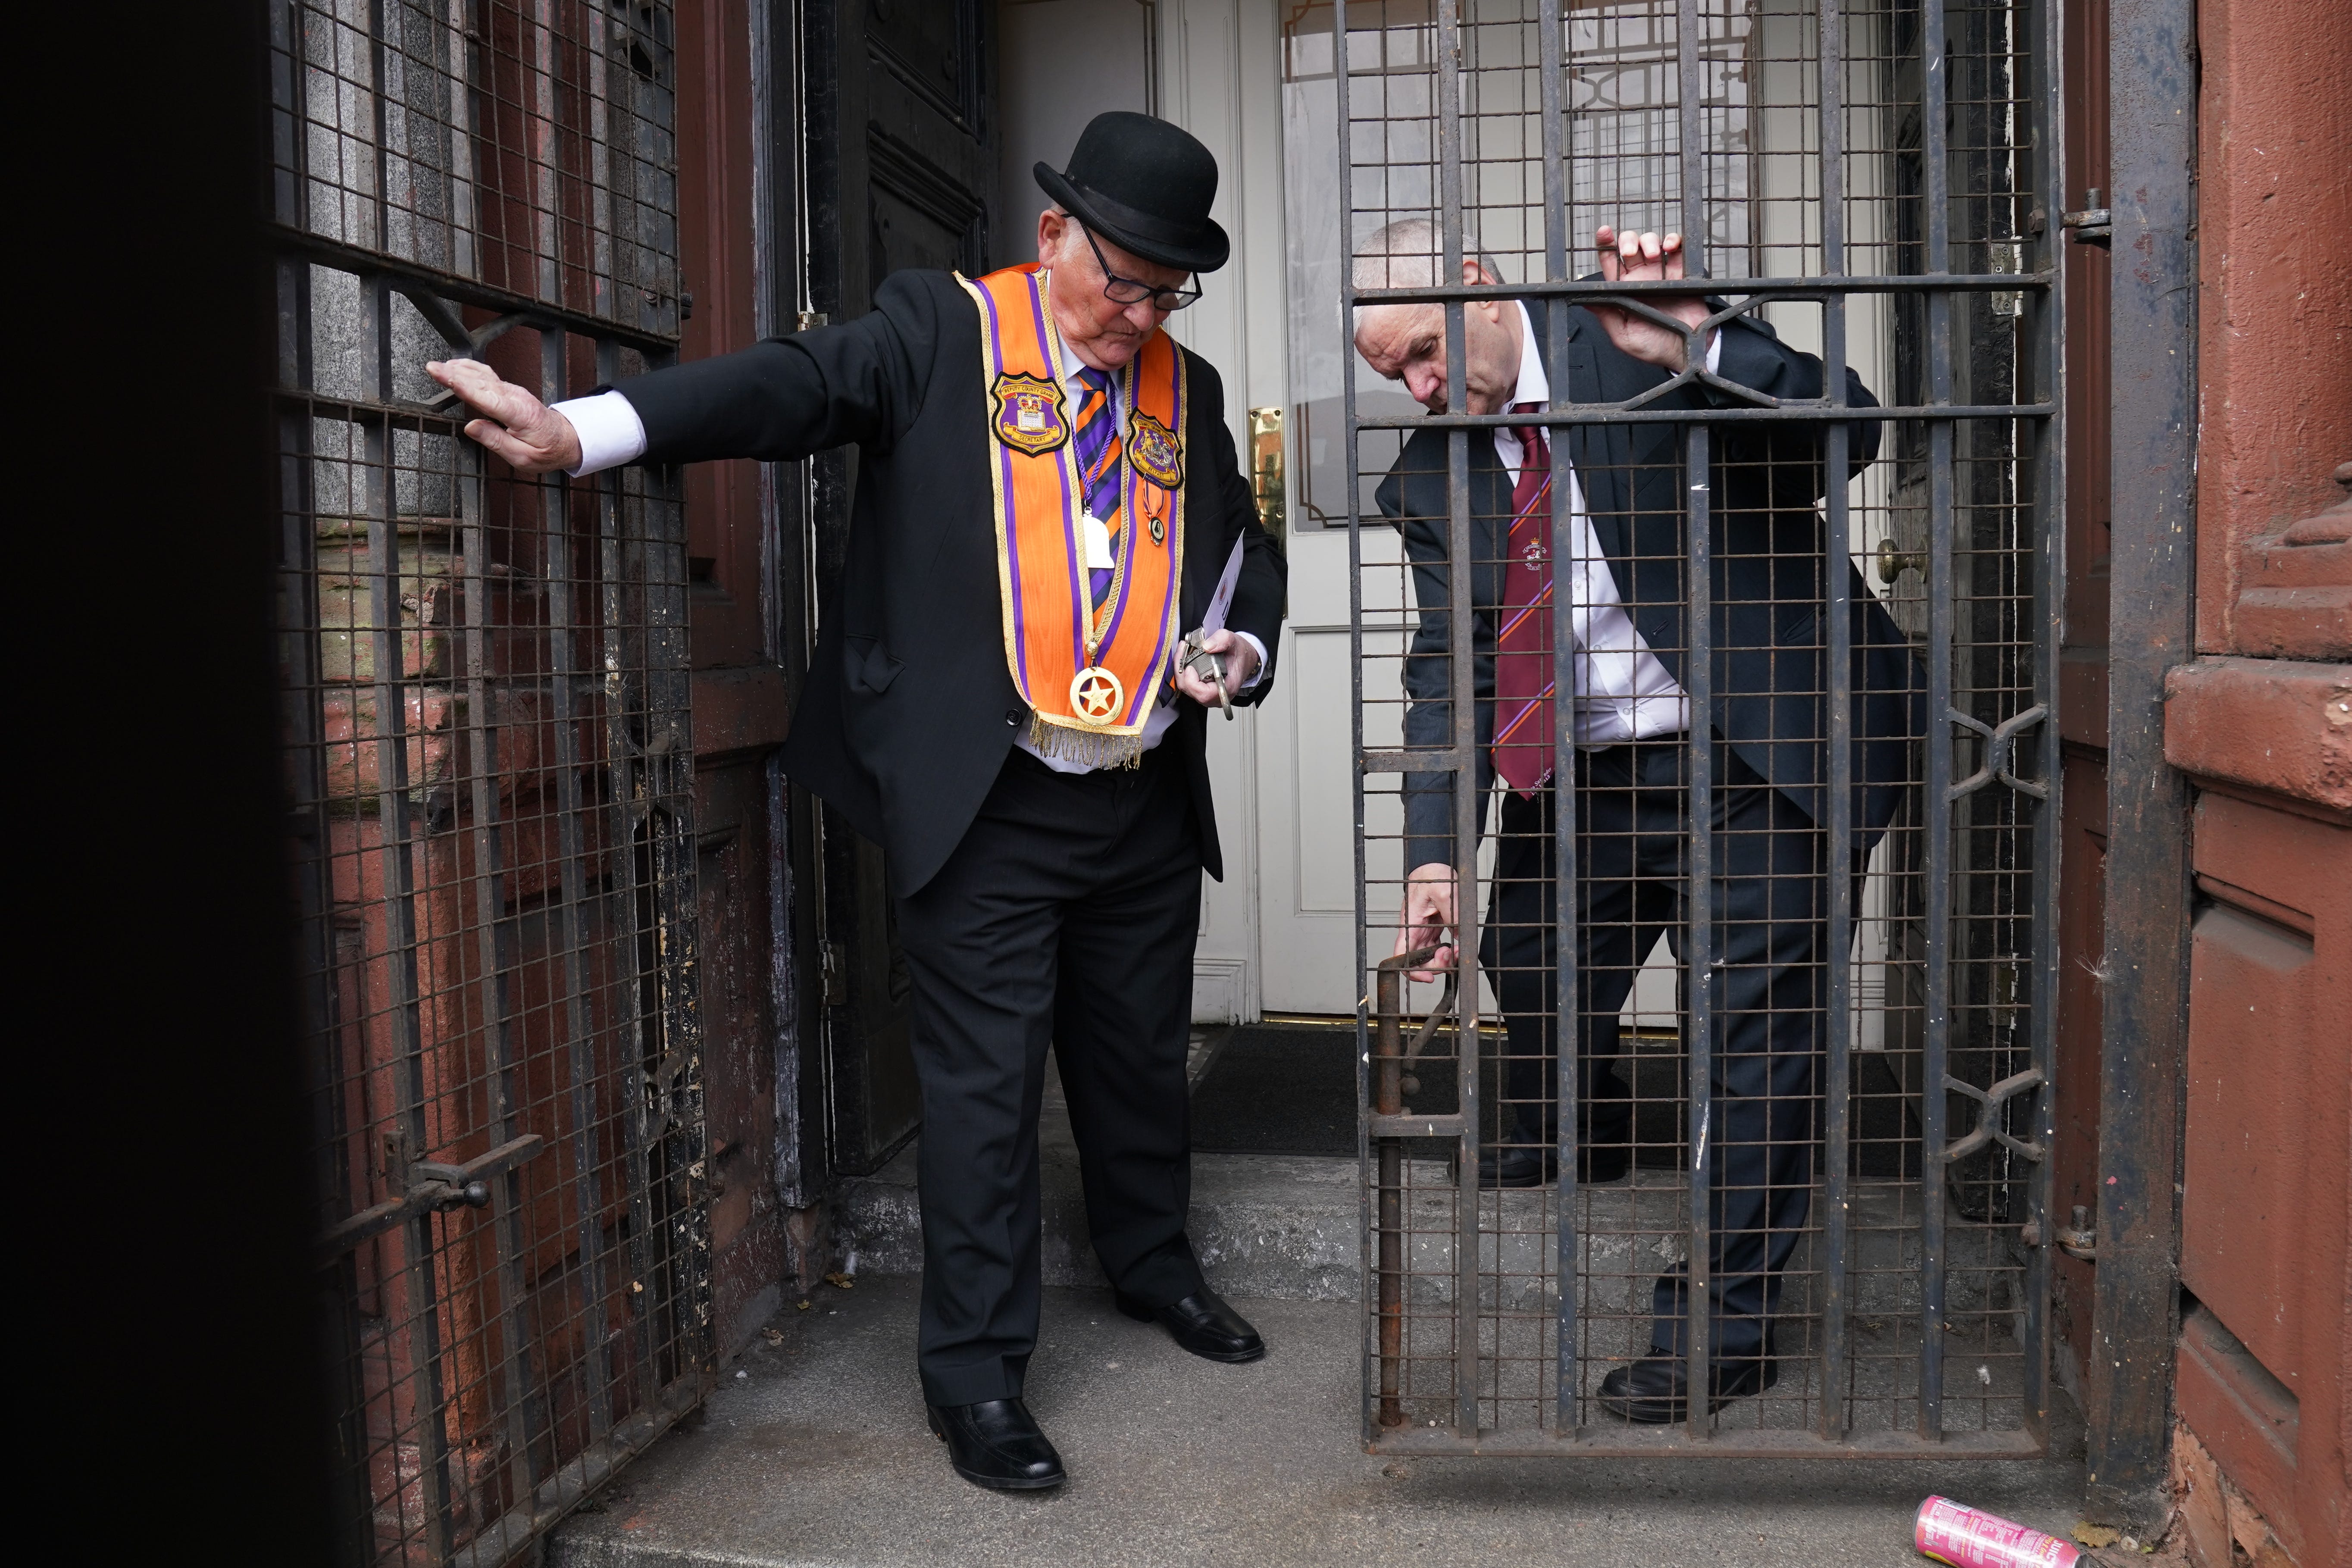 Orange Order members open the gates to the Belfast Orange Hall on Clifton Street in Belfast ahead of their parade (Brian Lawless/PA)